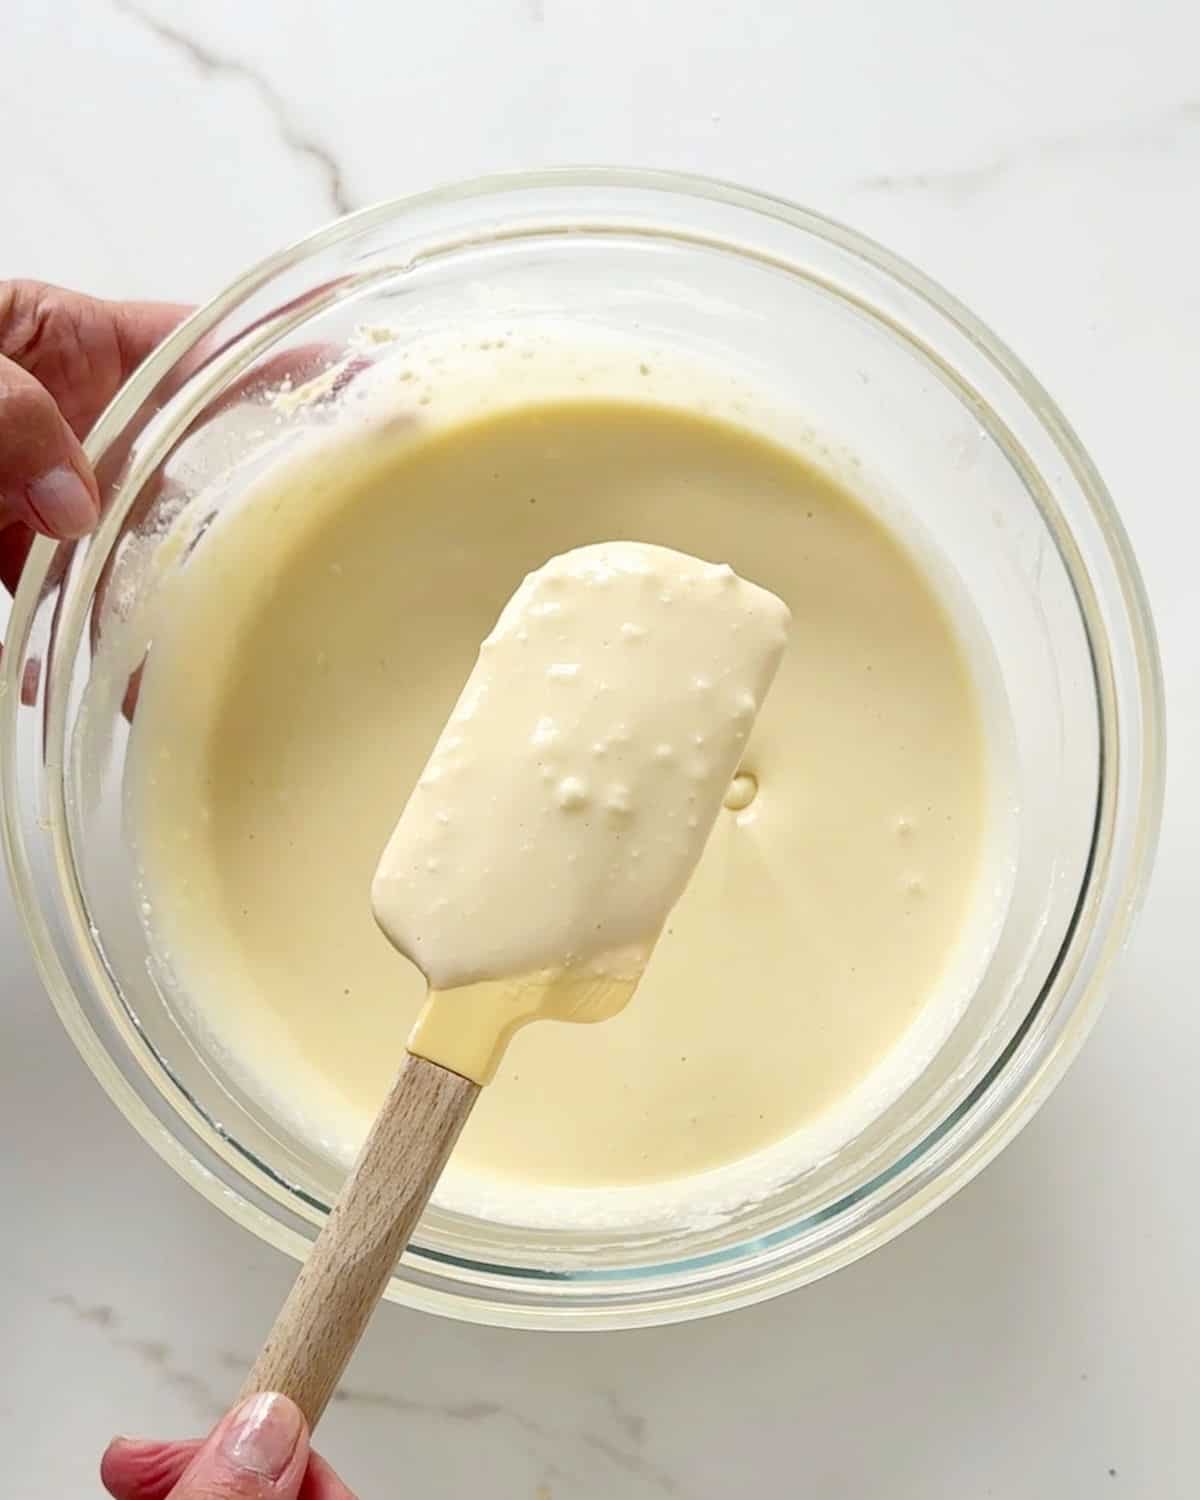 Ricotta cheesecake batter texture being shown with a spatula from a glass bowl. White marble surface.